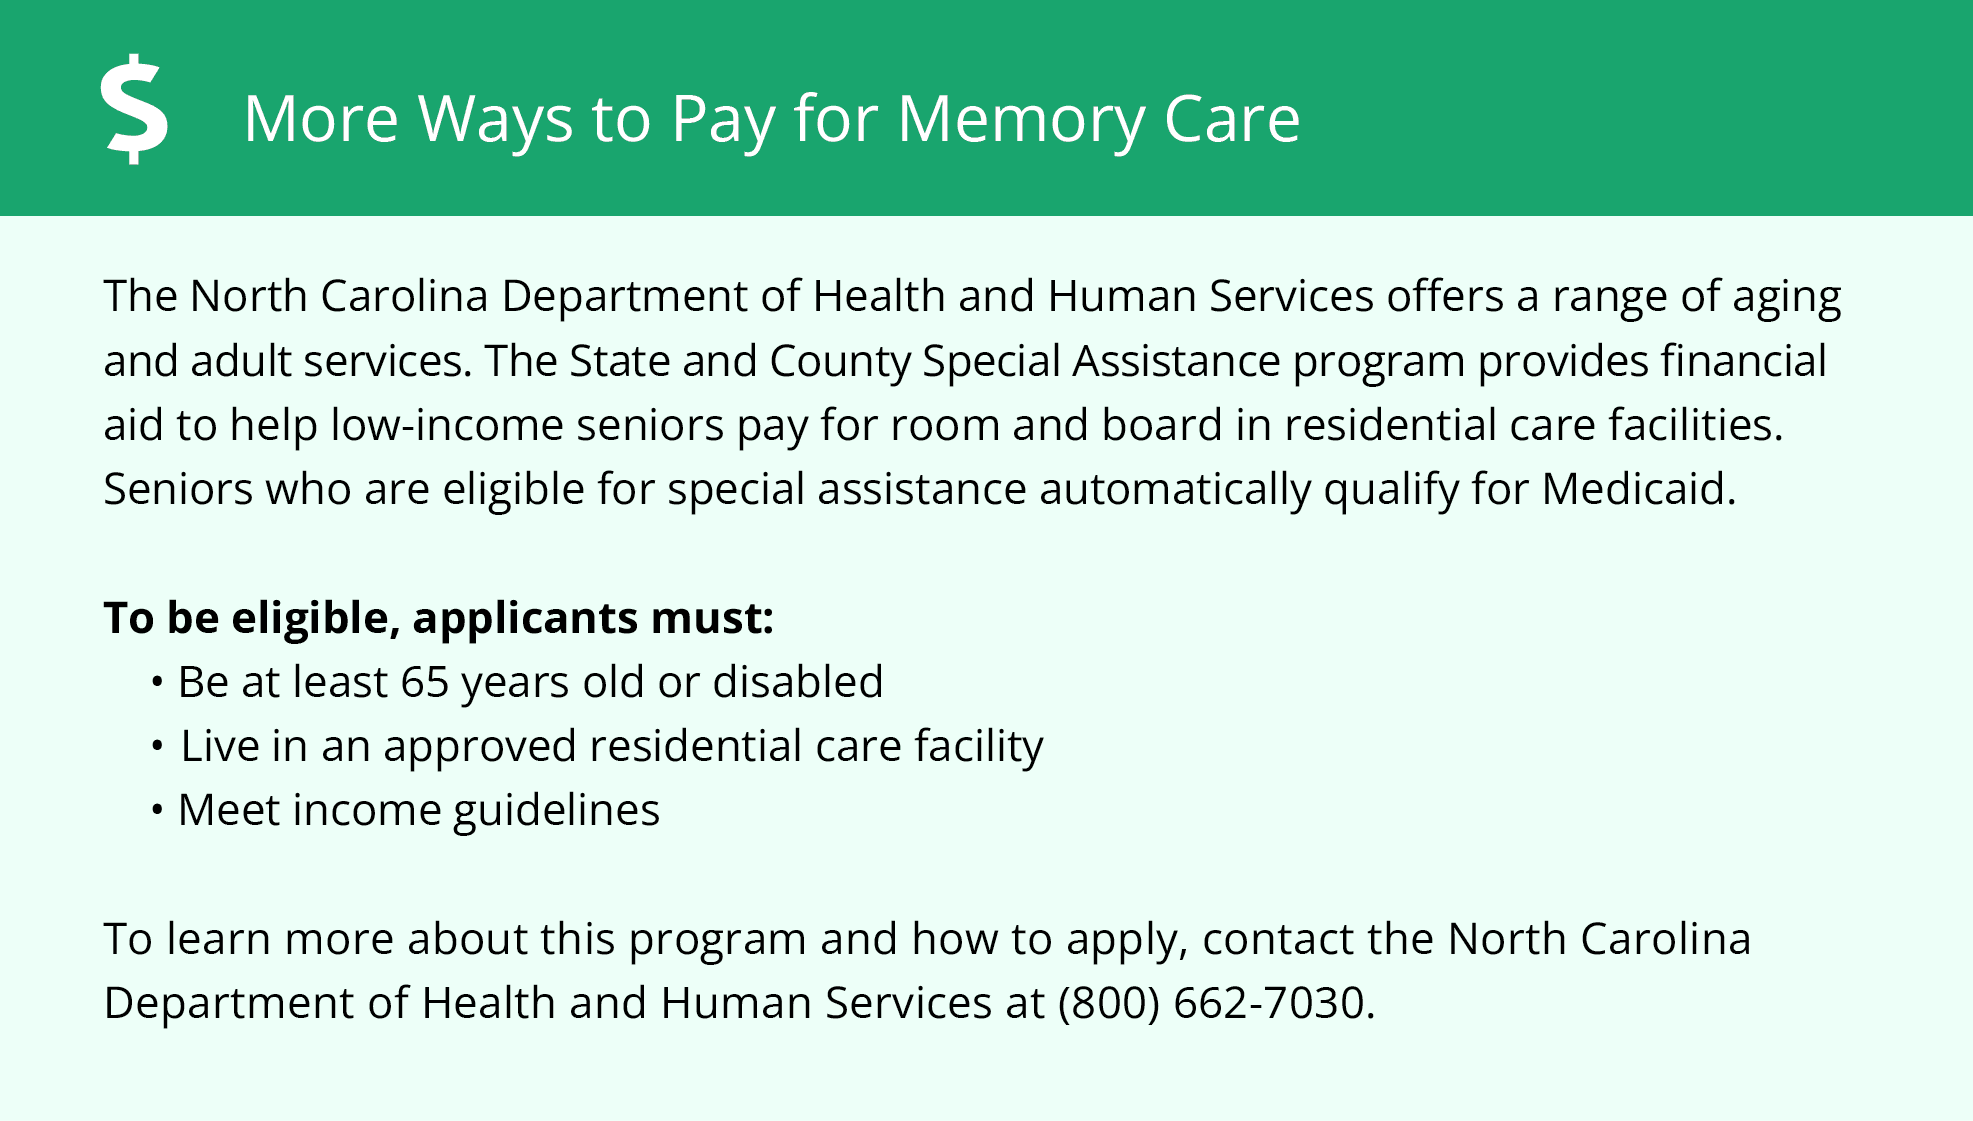 More ways to pay for memory care in NC